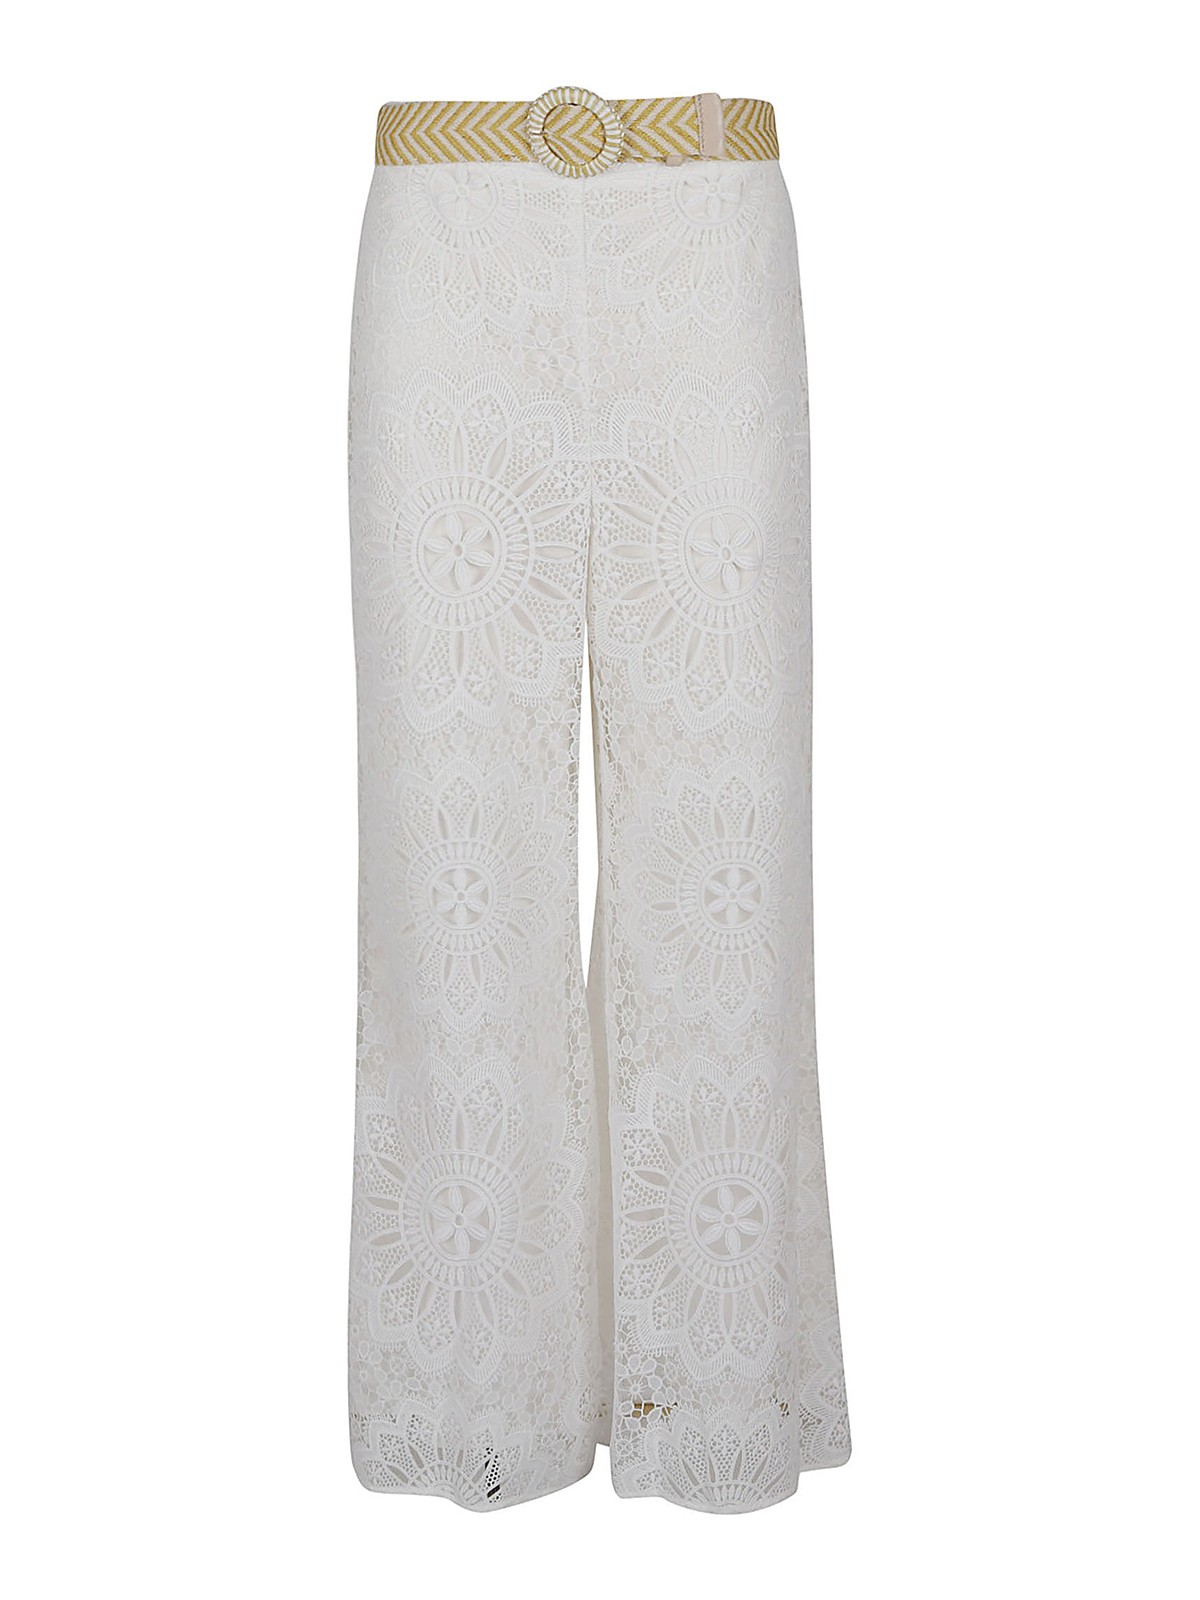 Zimmermann Chintz Doily Lace Pant In White